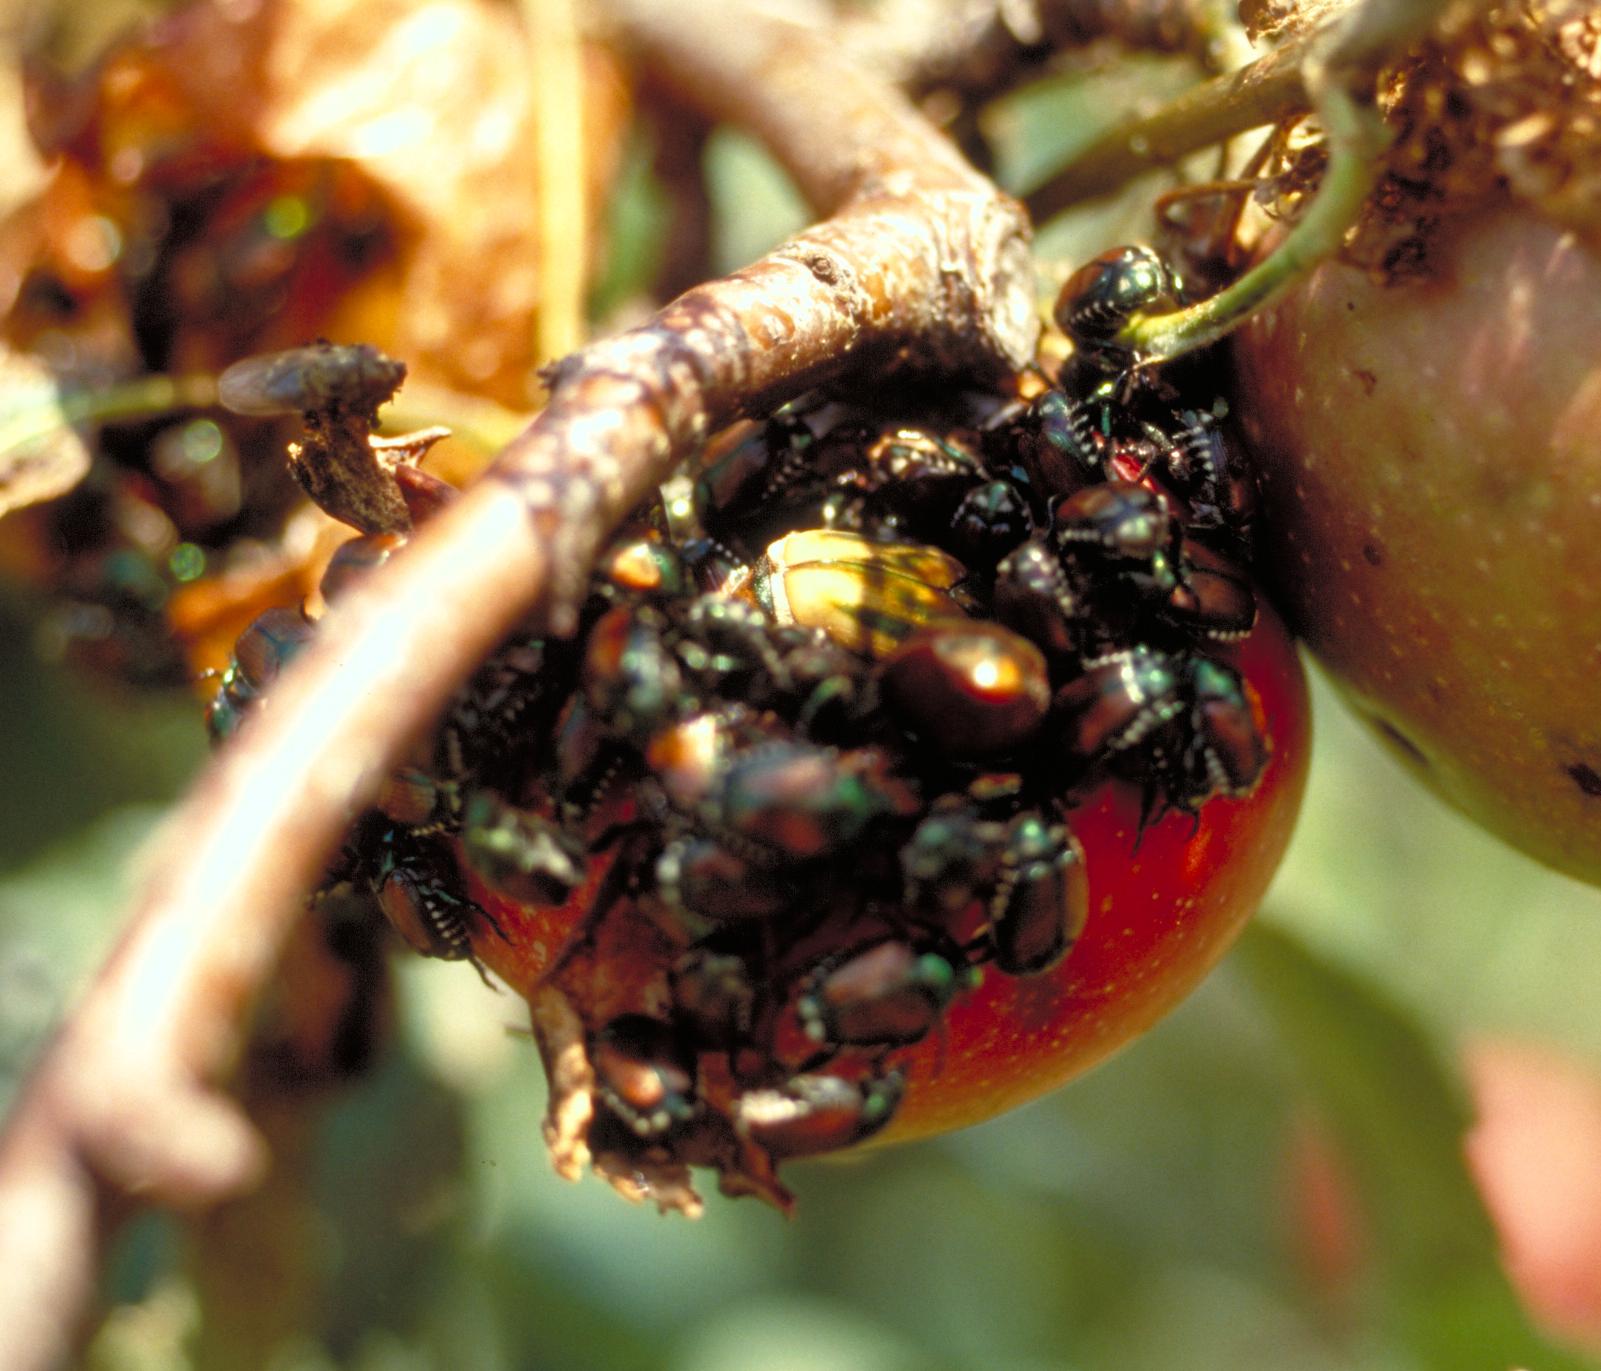 Japanese beetle adults (Bessin, UKY)